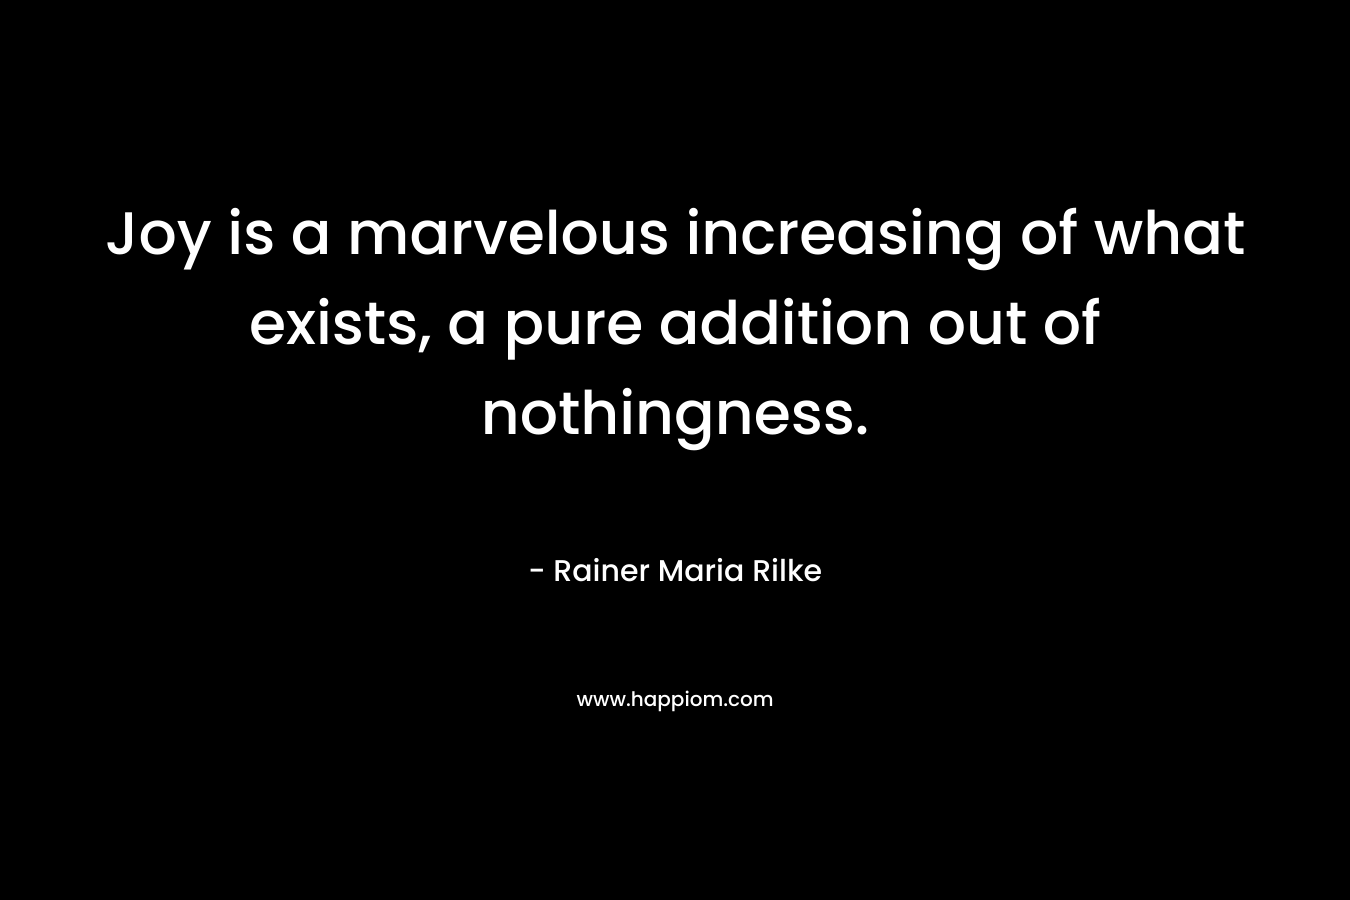 Joy is a marvelous increasing of what exists, a pure addition out of nothingness. – Rainer Maria Rilke